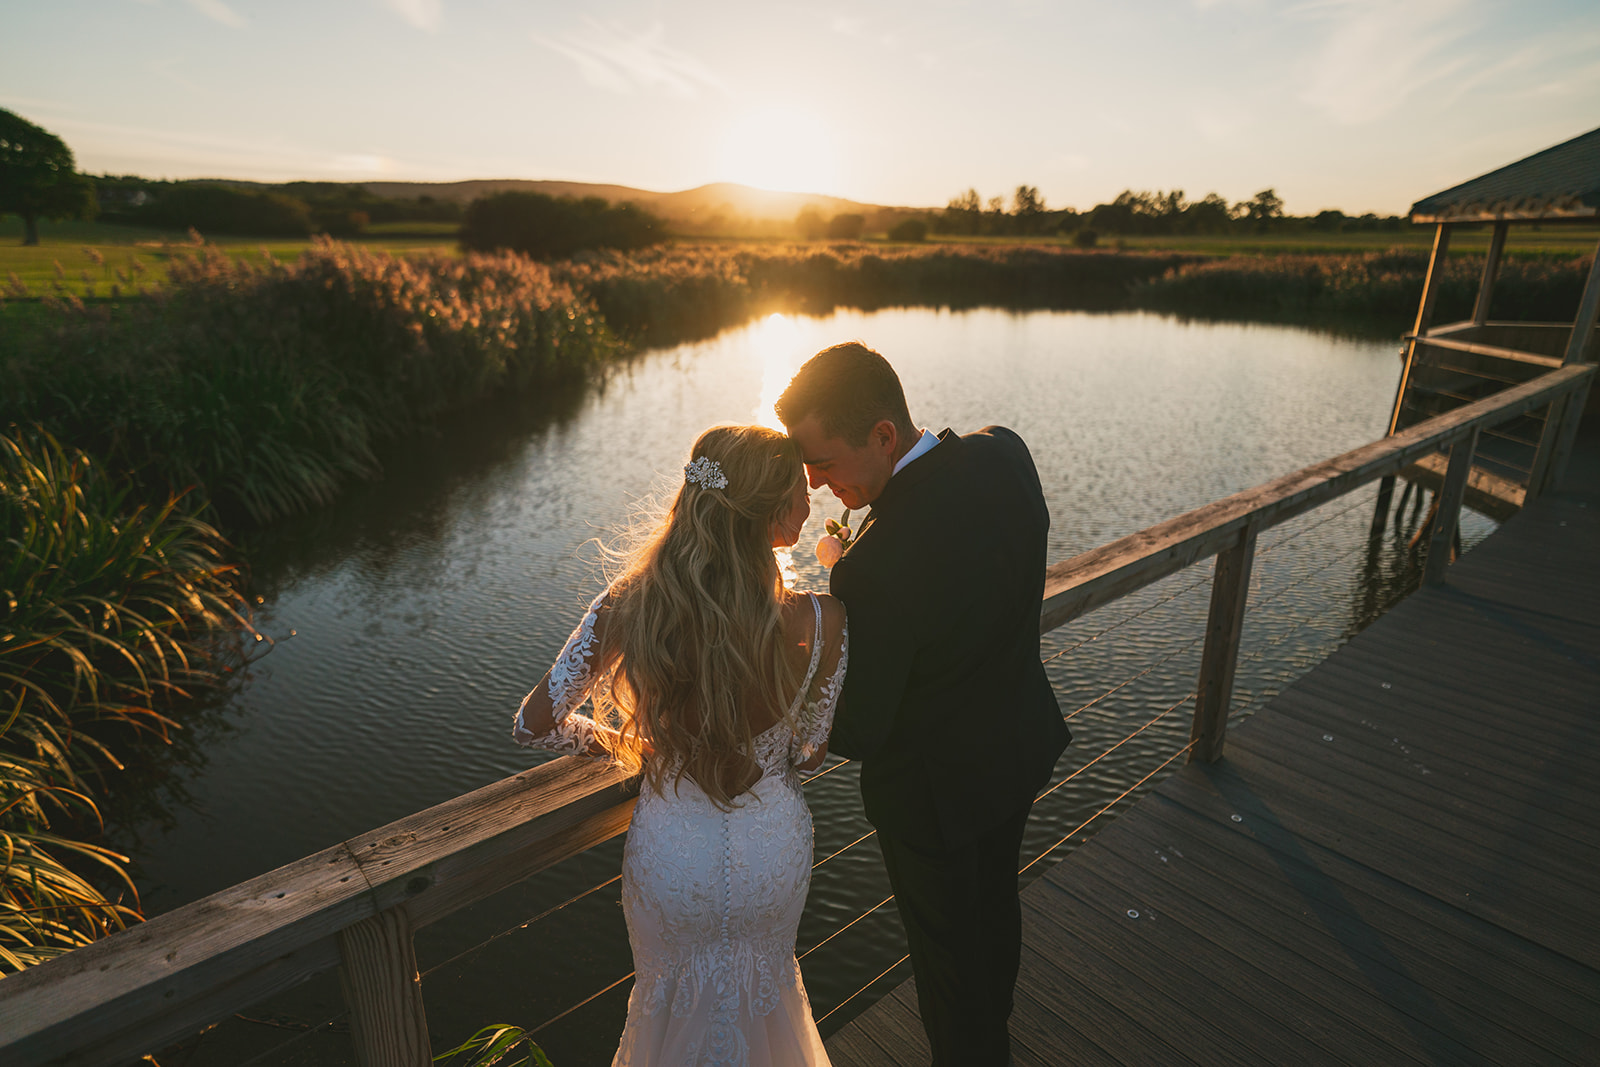 A bride and groom standing on a bridge overlooking a pond at sunset.